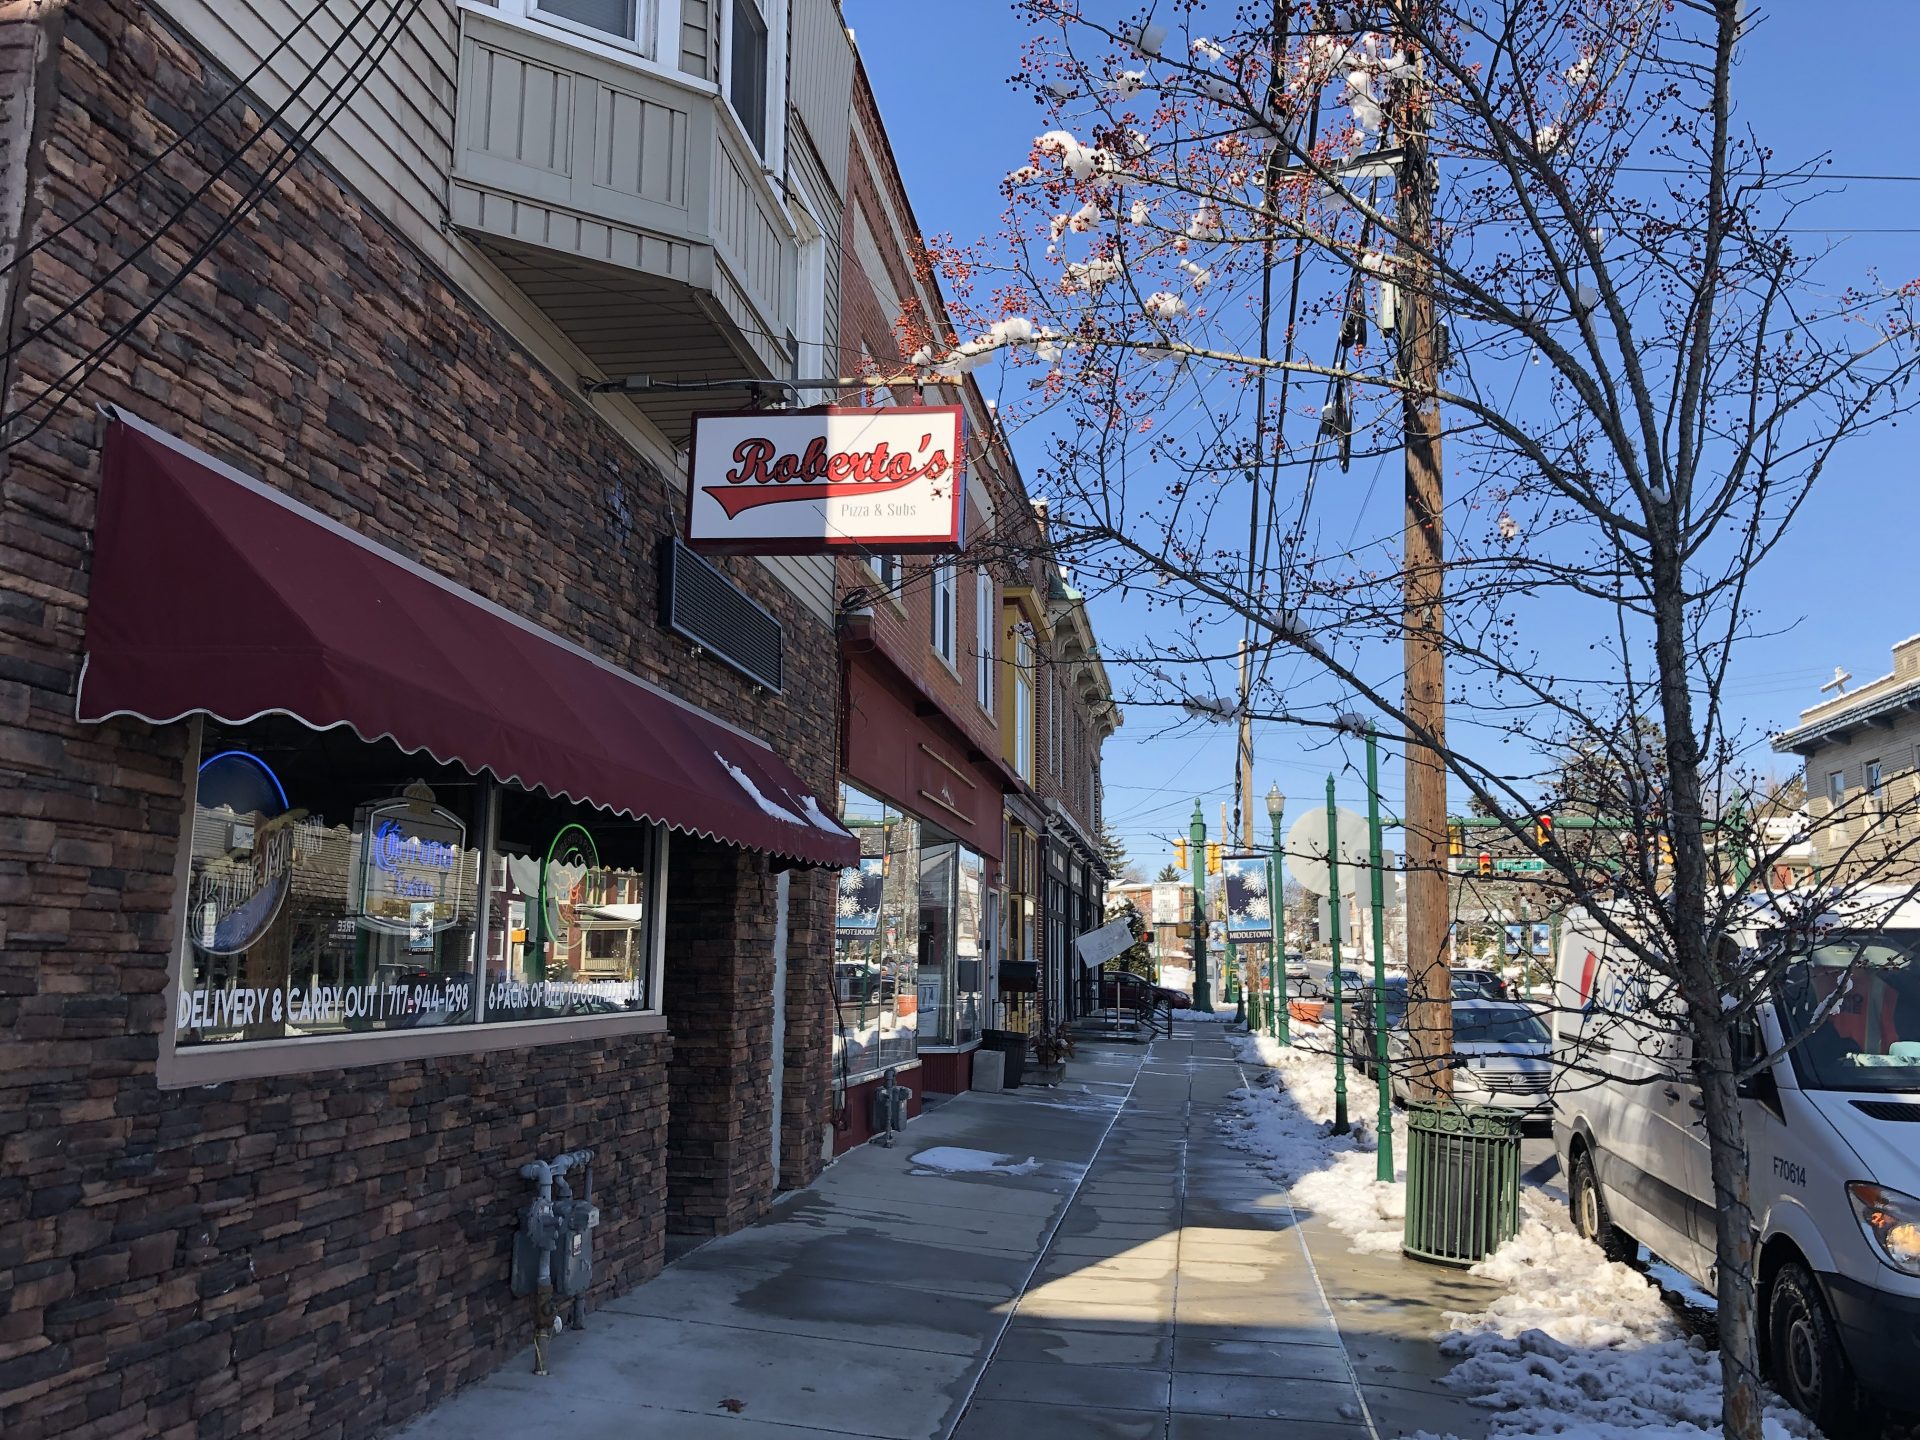 Roberto's Pizza & Subs is seen in Middletown on March 1, 2019.